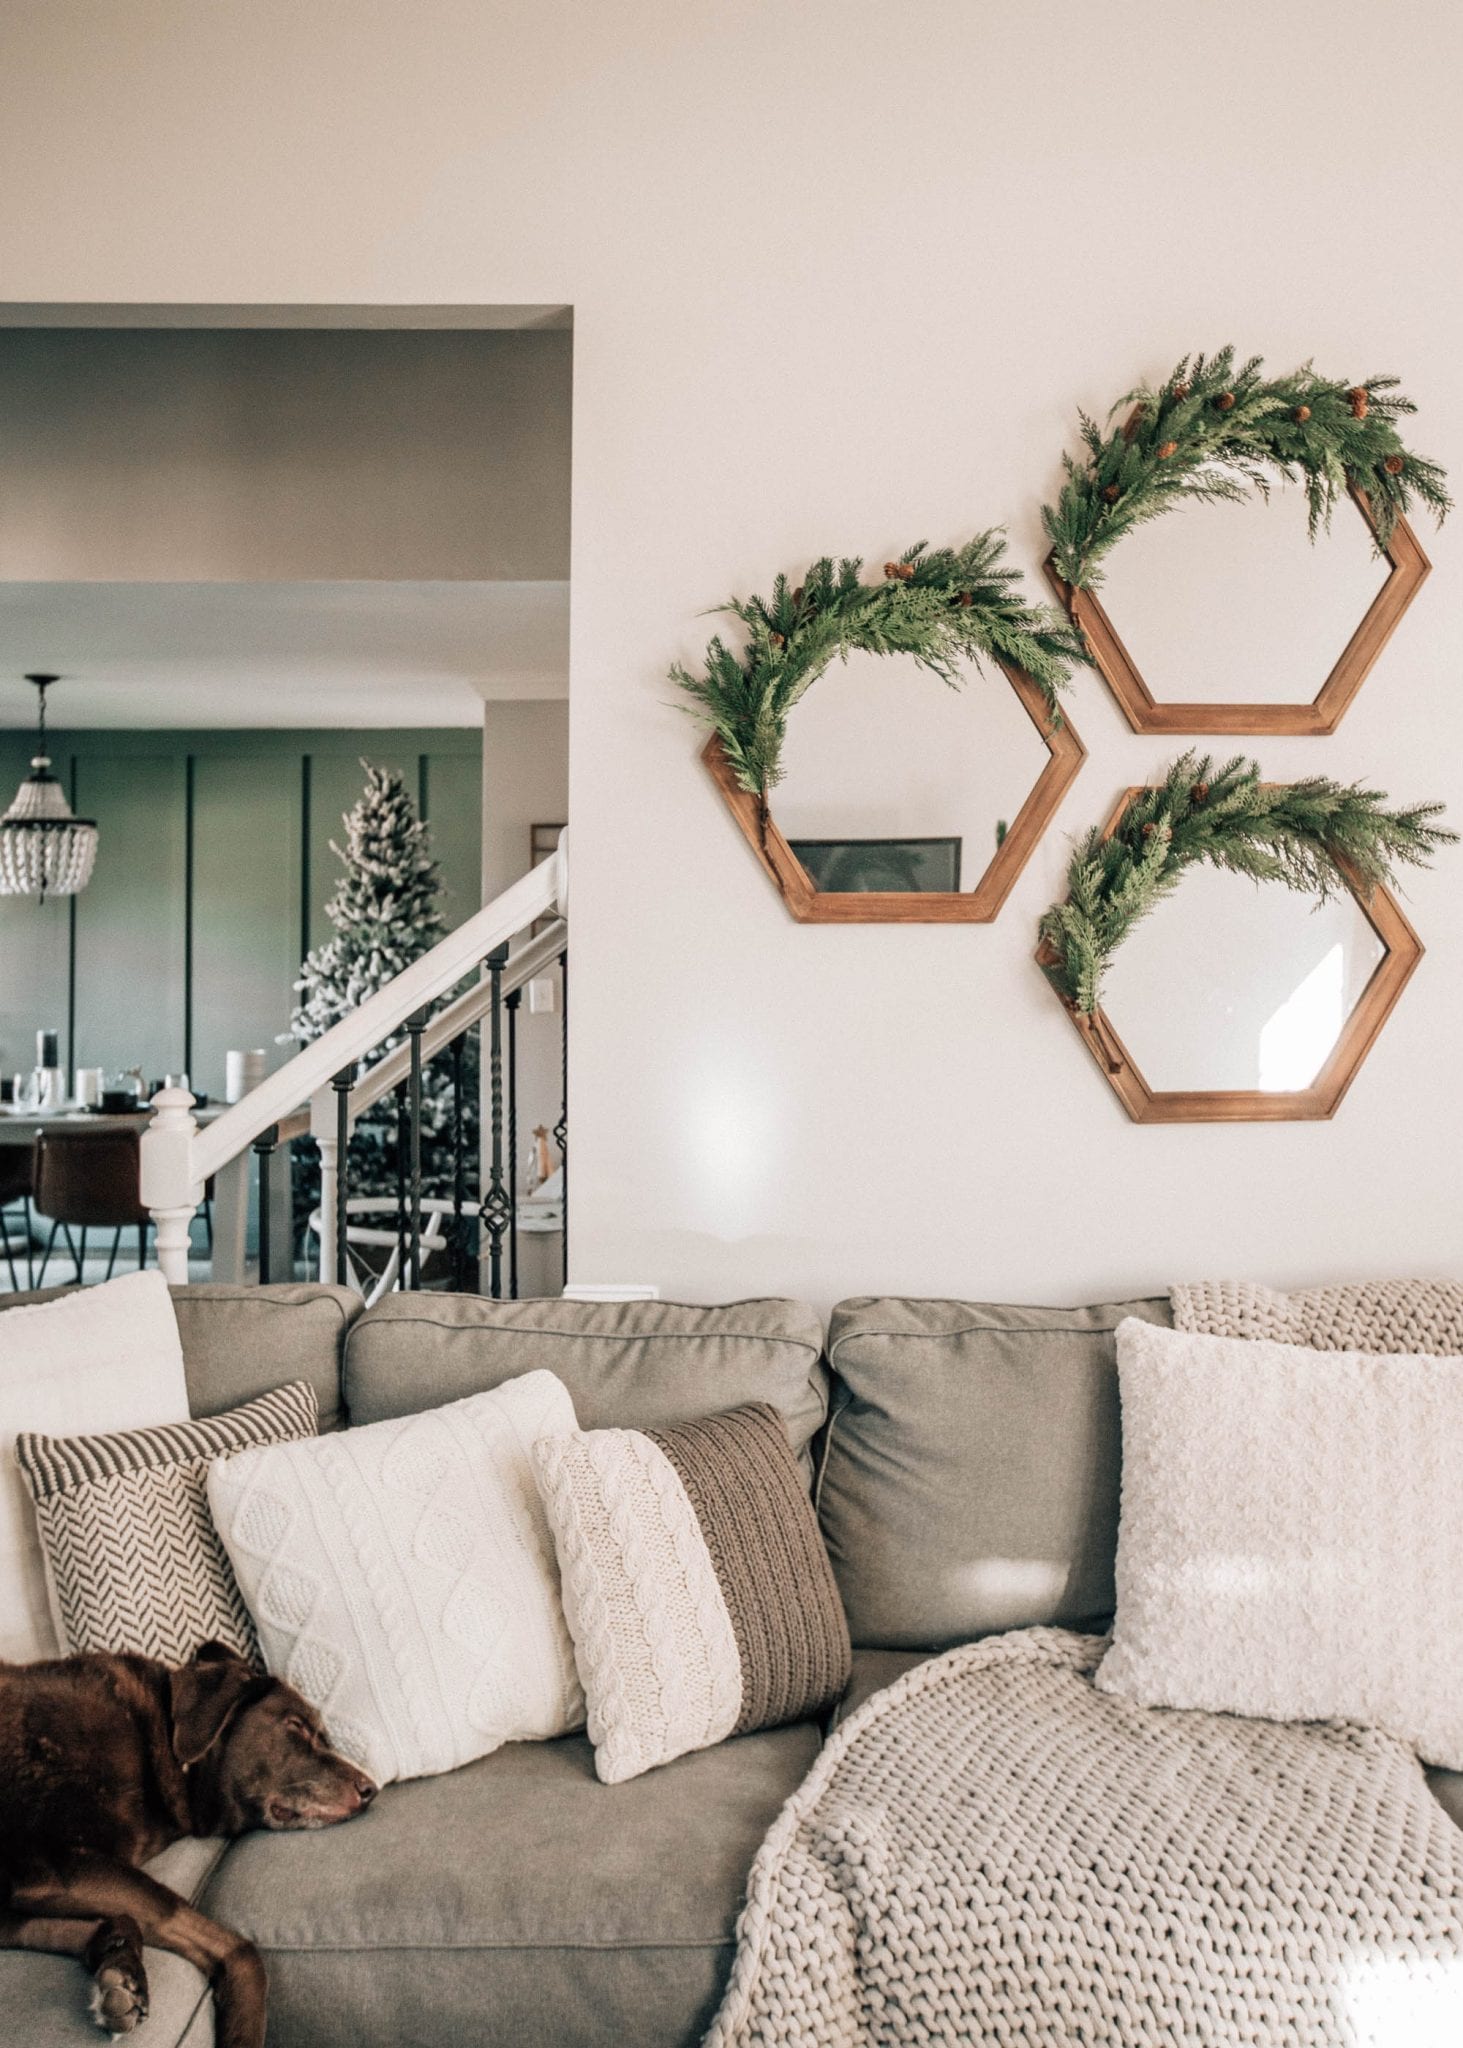 wooden hexagon mirrors with garland